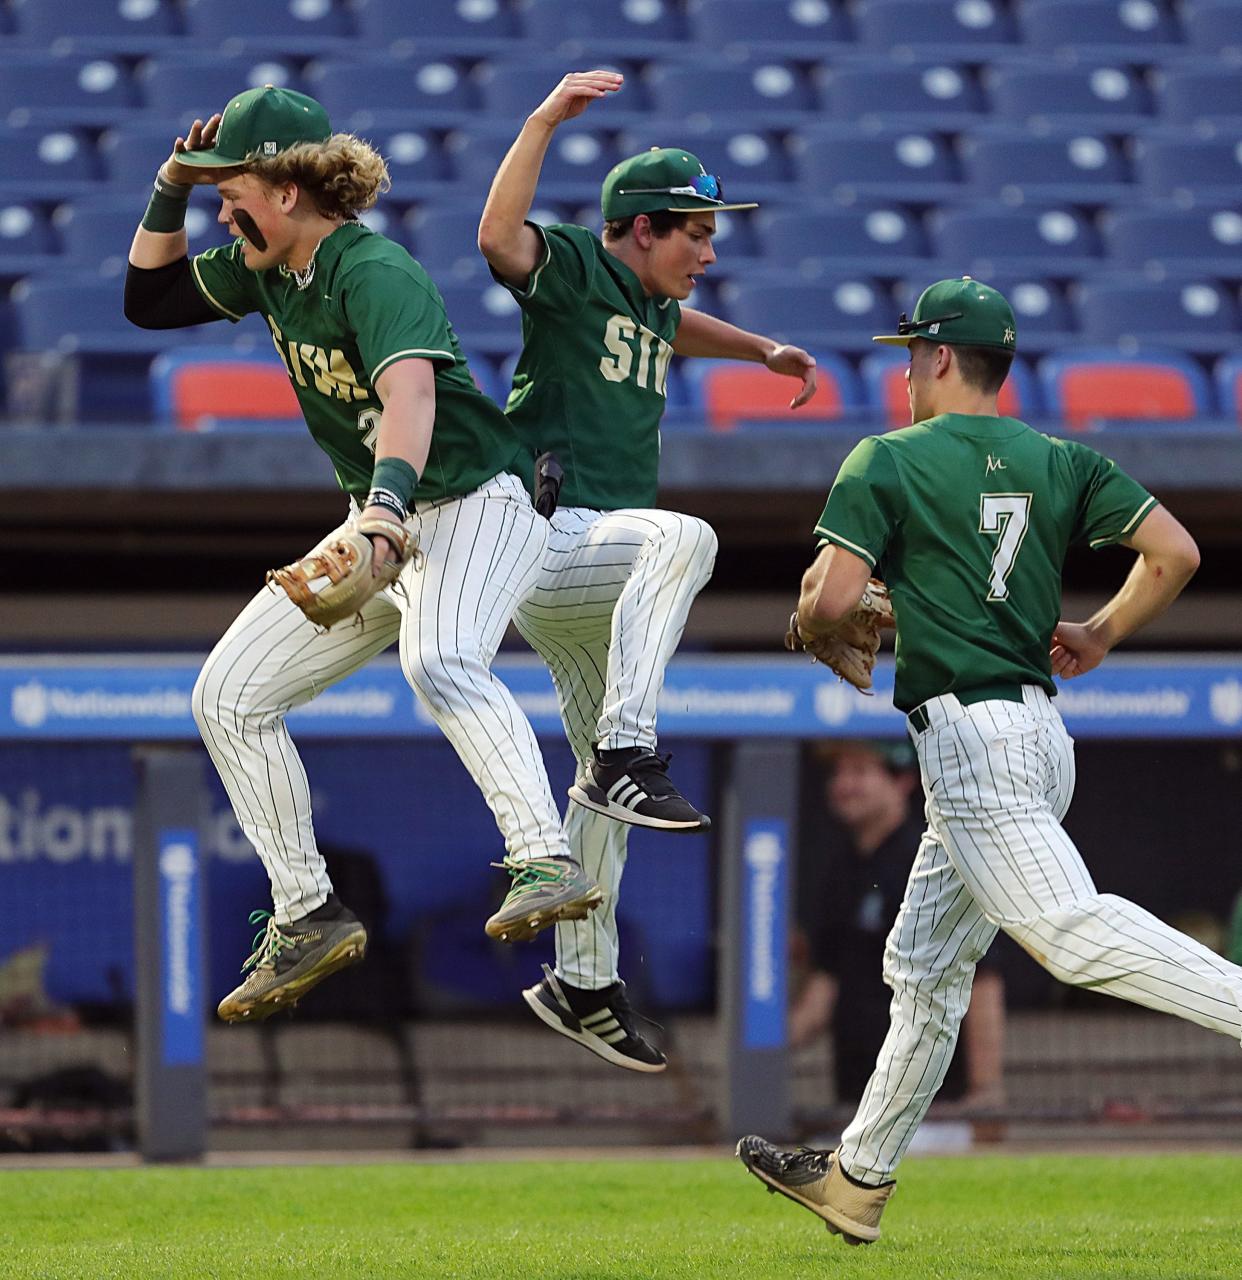 STVM's Devon Lehman celebrates with teammates at the end of the fifth inning of a baseball game against Hoban at Canal Park, Friday, May 12, 2023, in Akron, Ohio.